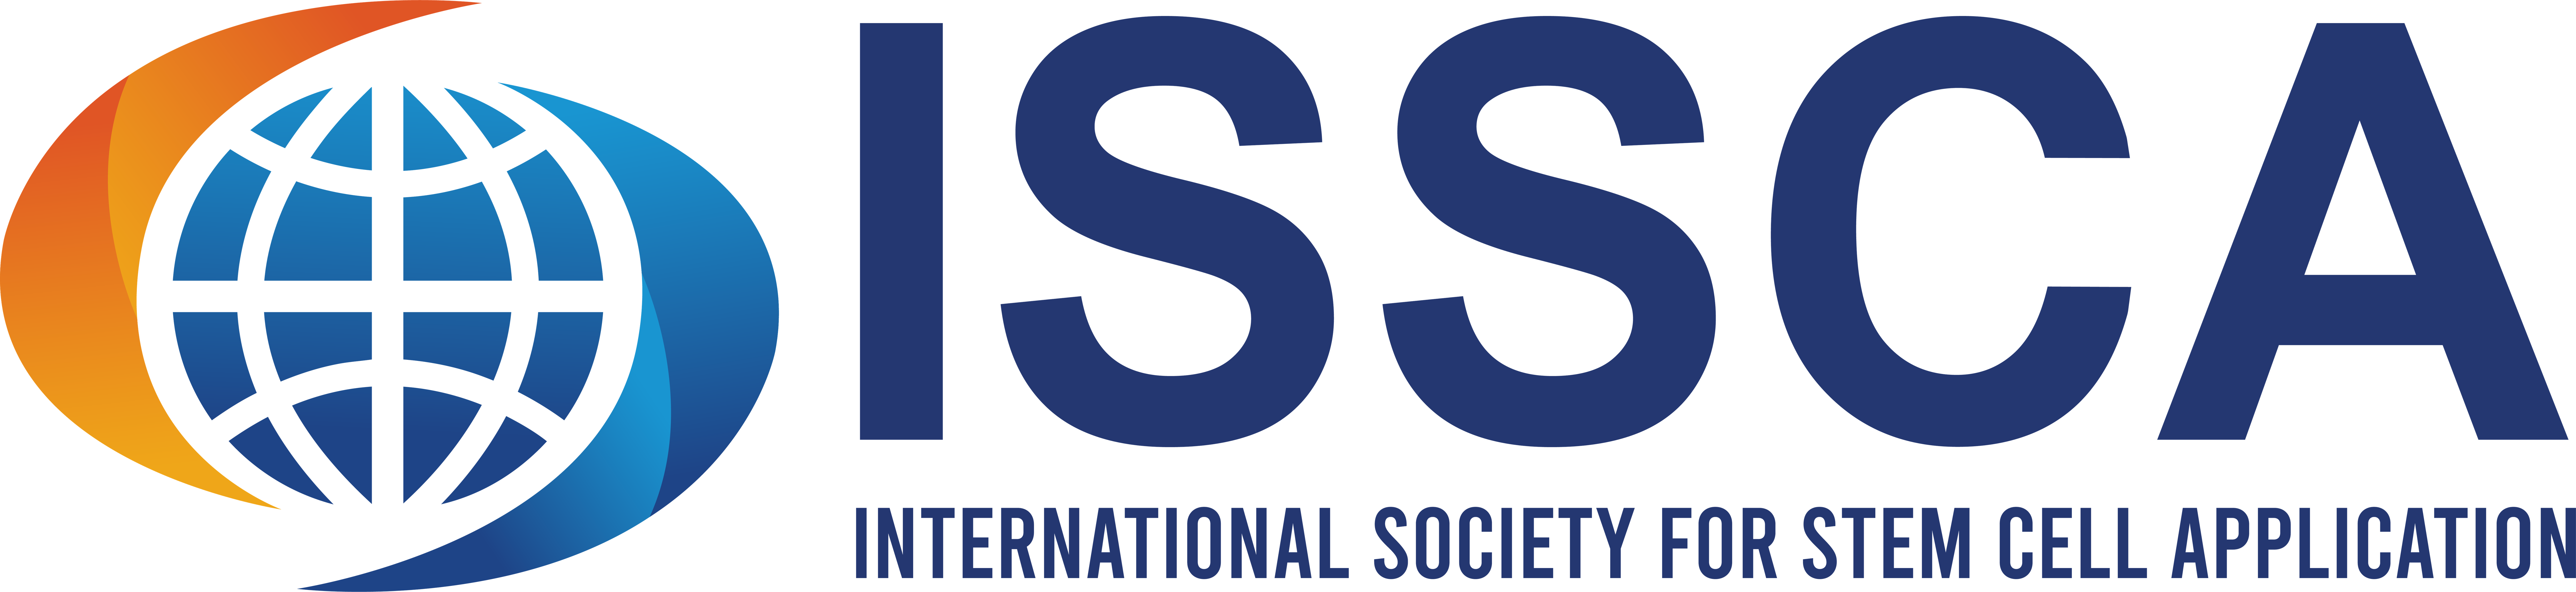 The International Society for Stem Cell Applications (ISSCA) Launches Comprehensive Specializations in Regenerative Medicine